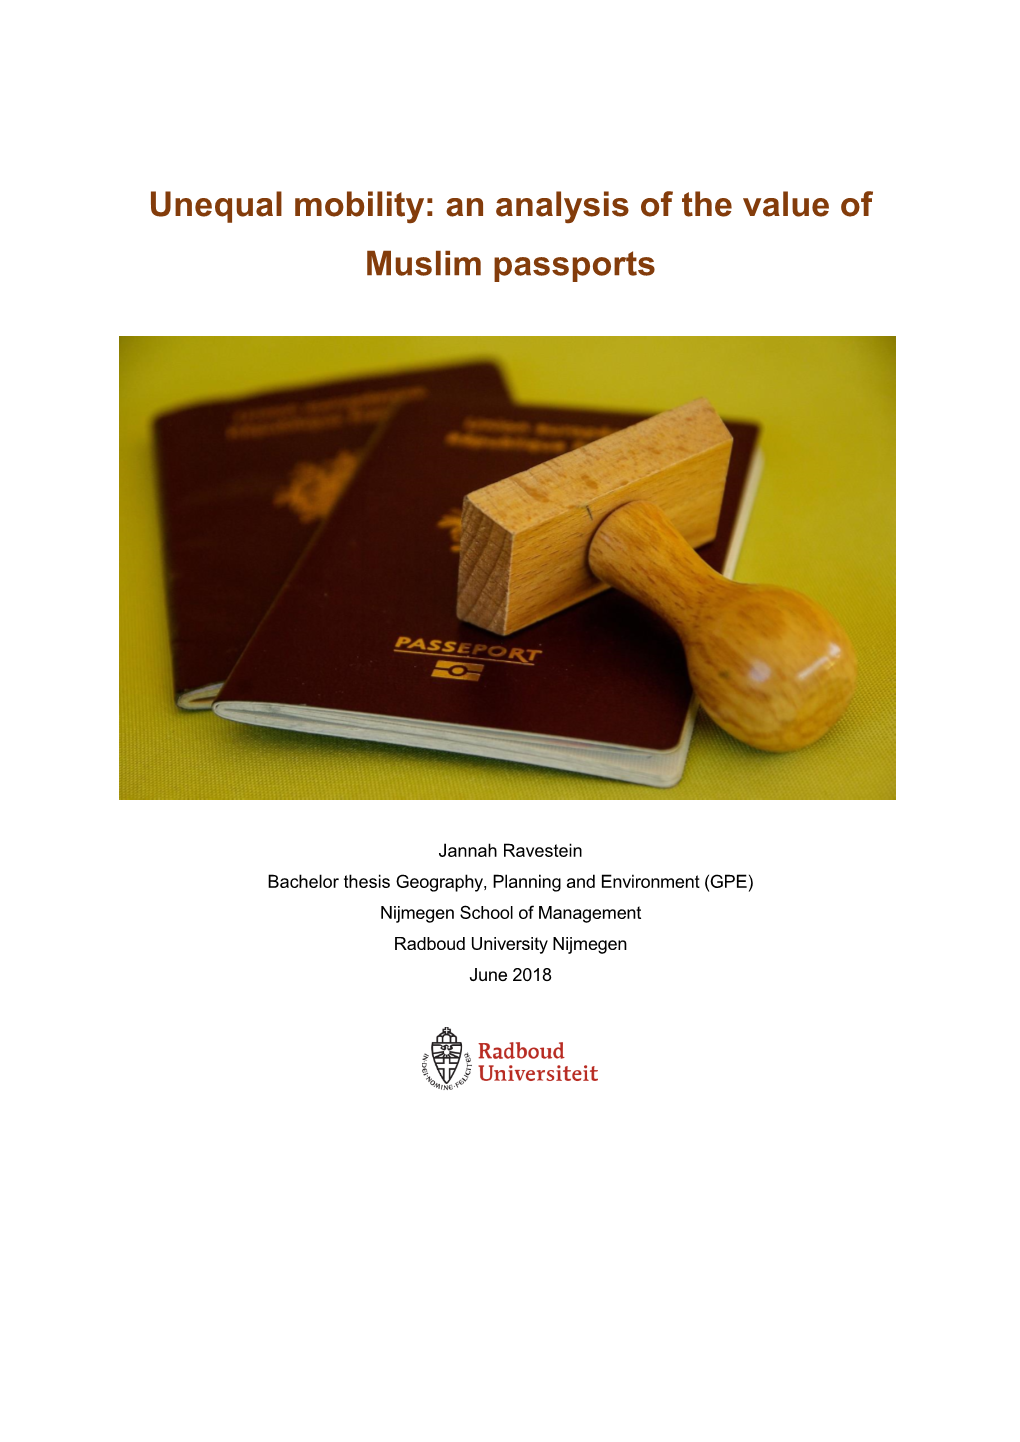 Unequal Mobility: an Analysis of the Value of Muslim Passports